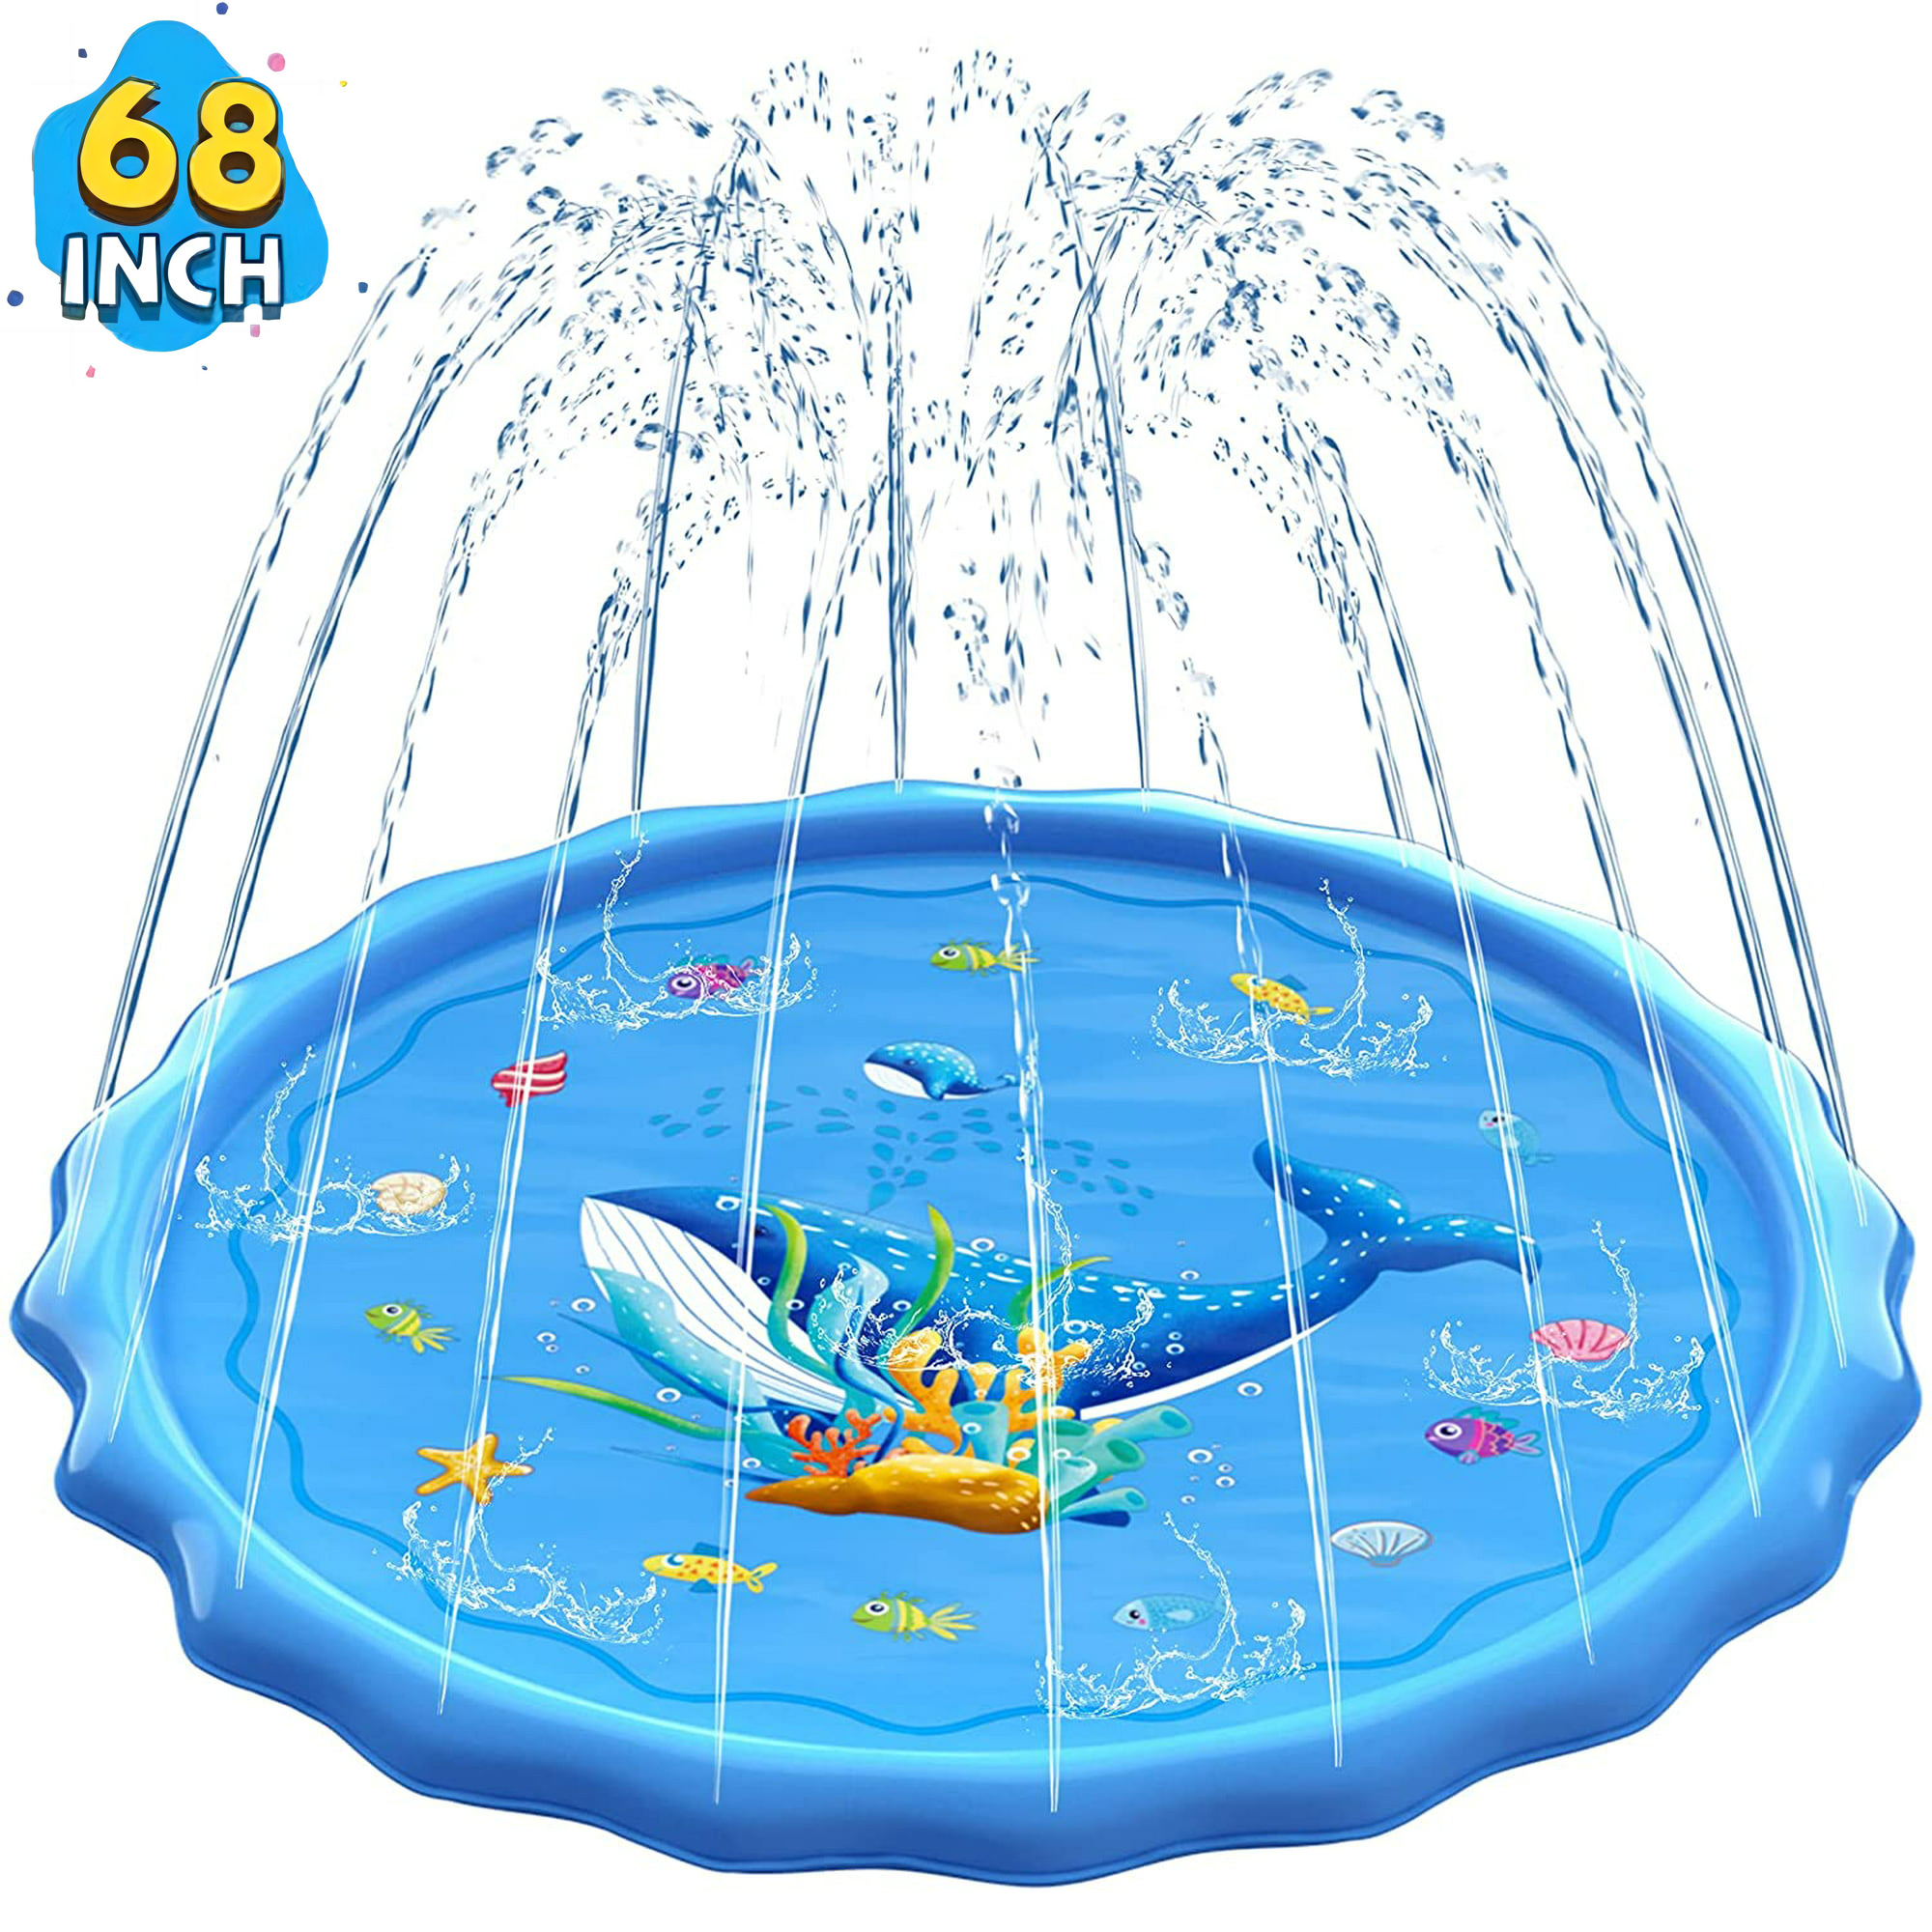 Meromore 68" Splash Pad for Kids and Adults Outdoor Lawn Games Water Play Toy Mat, Blue - image 1 of 8